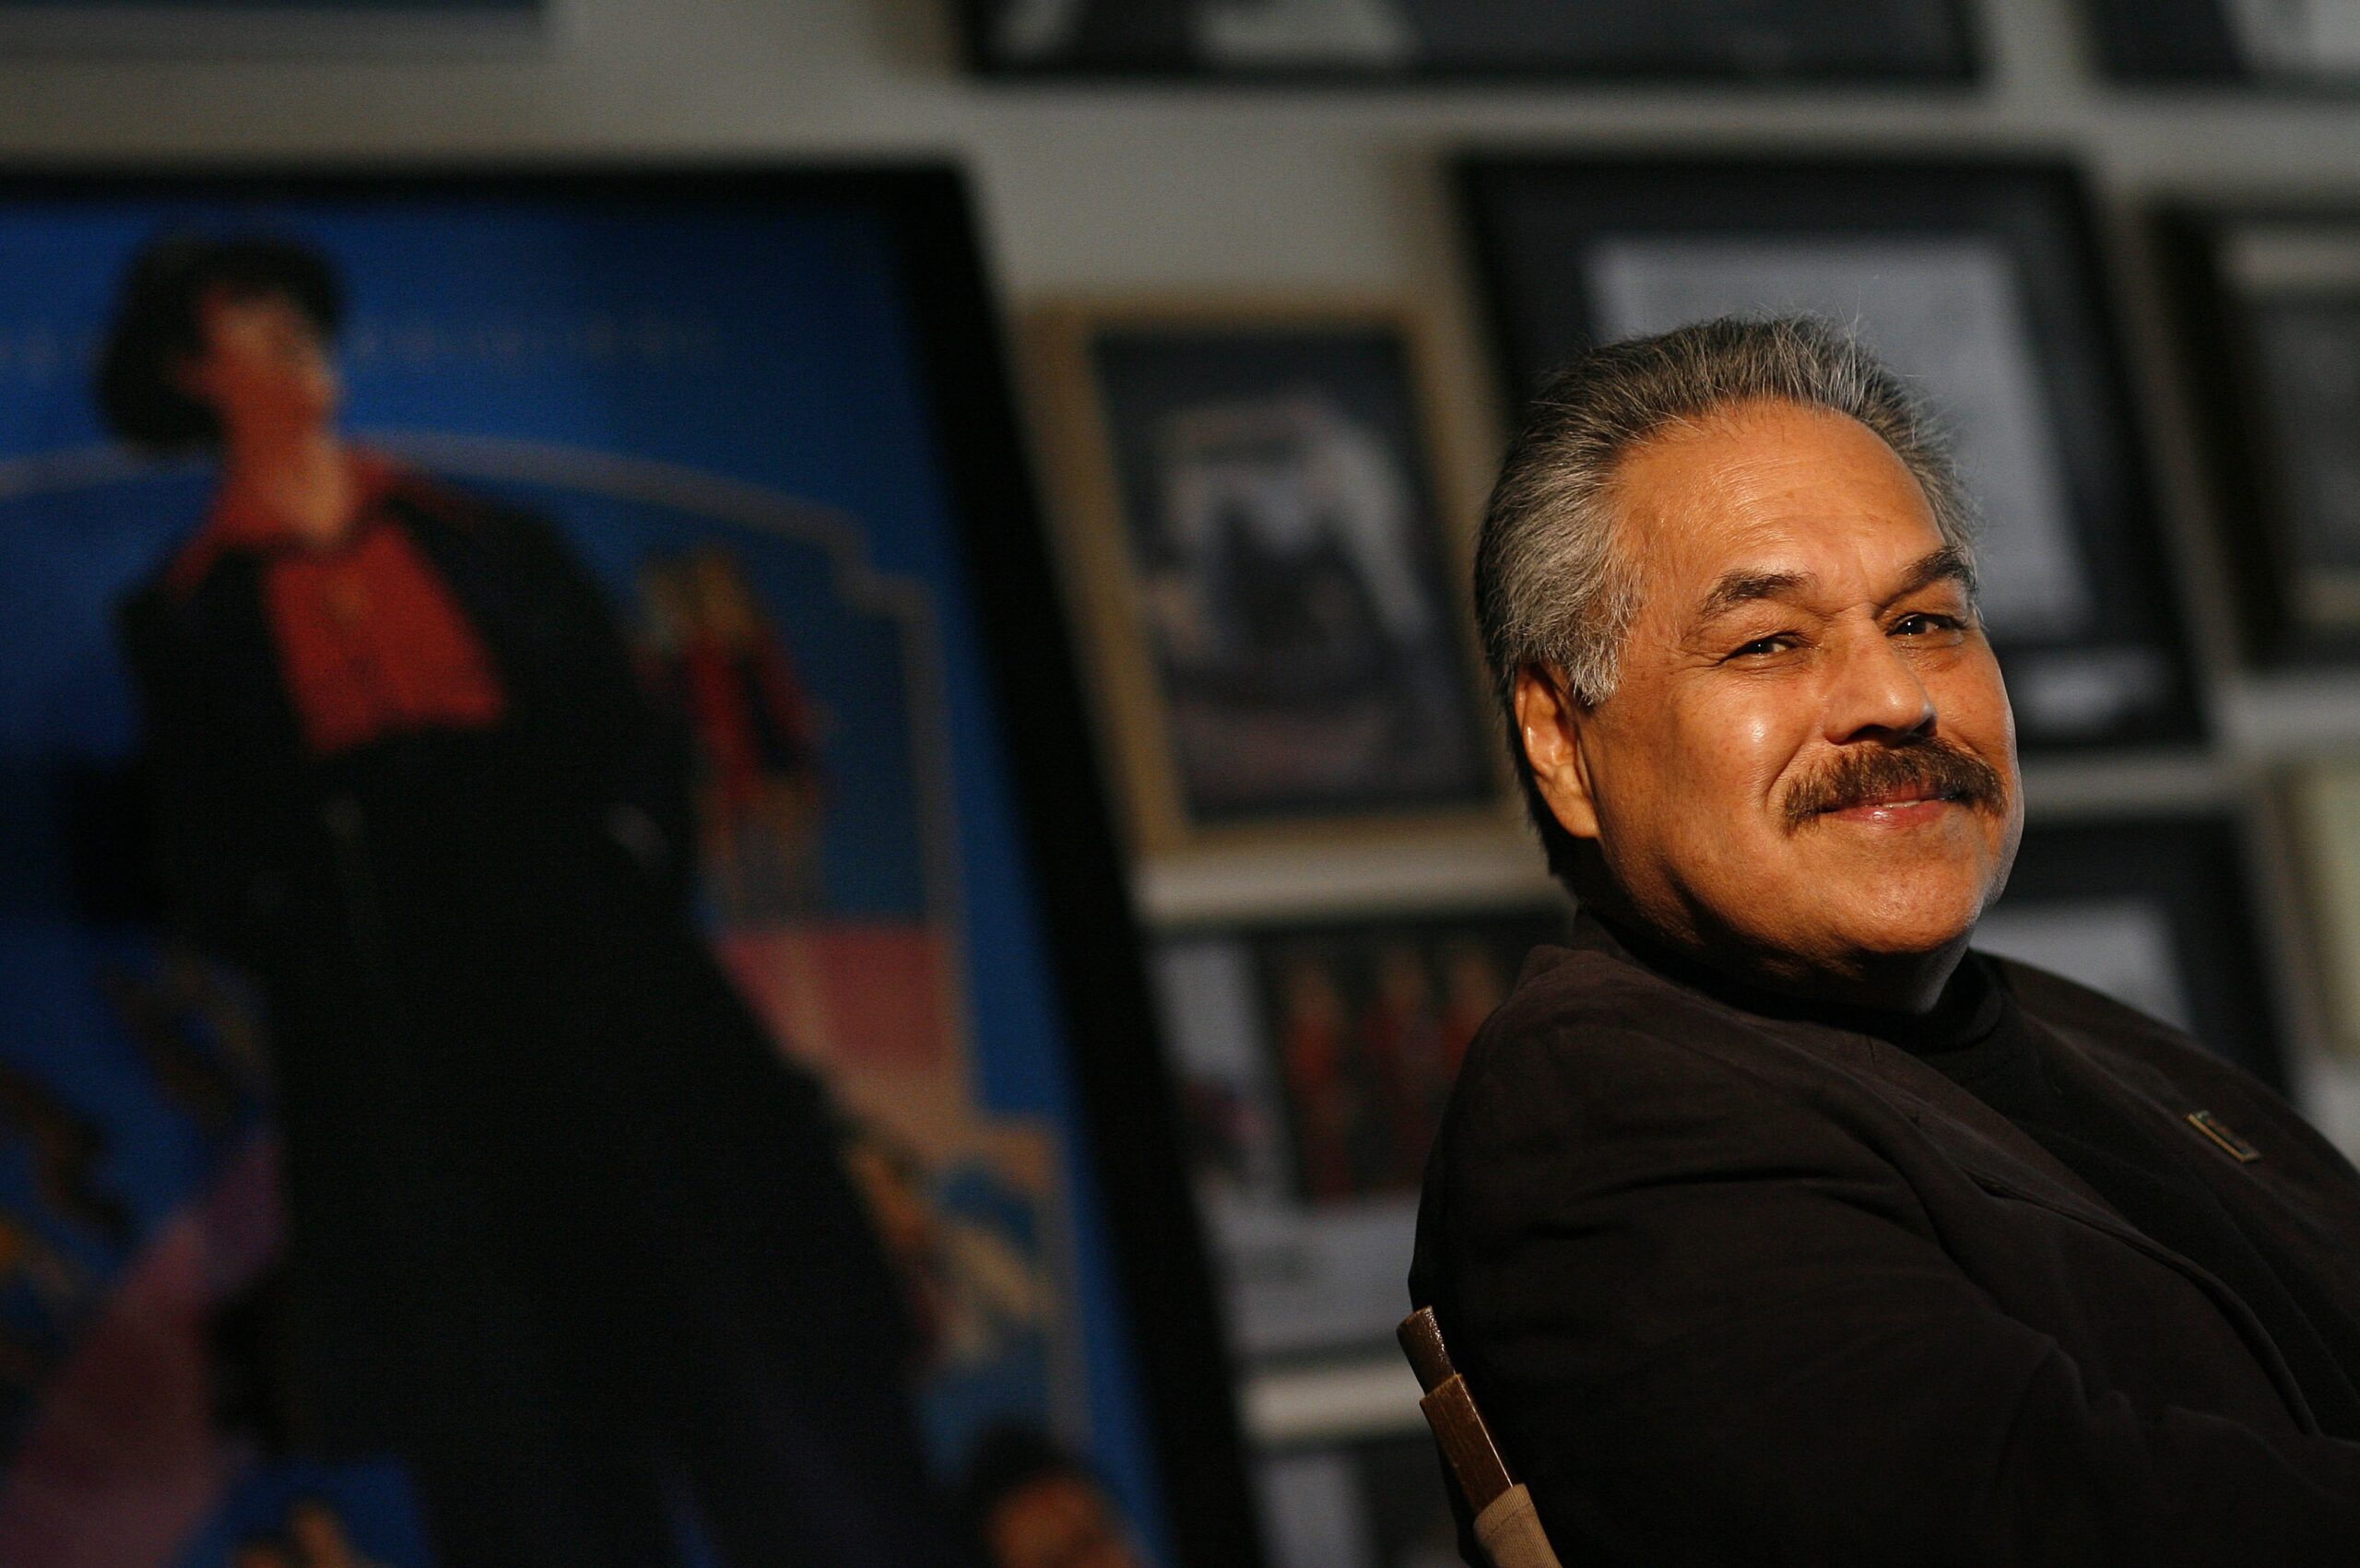 A LETTER FROM LUIS VALDEZ TO OUR ESTEEMED DONORS AND SUPPORTERS OF EL TEATRO CAMPESINO, WHATEVER YOU CAN DONATE WILL BE DEEPLY APPRECIATED.